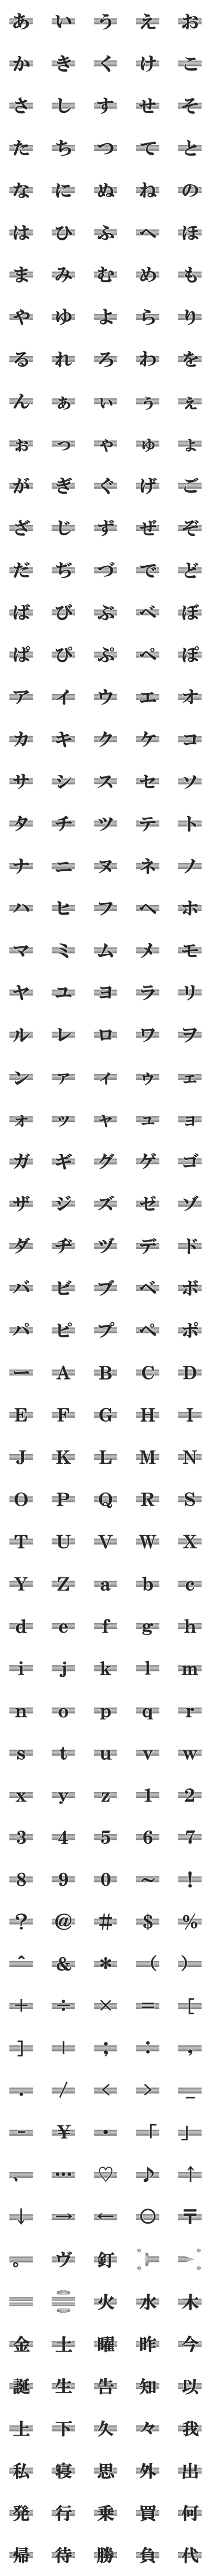 [LINE絵文字]釘の画像一覧